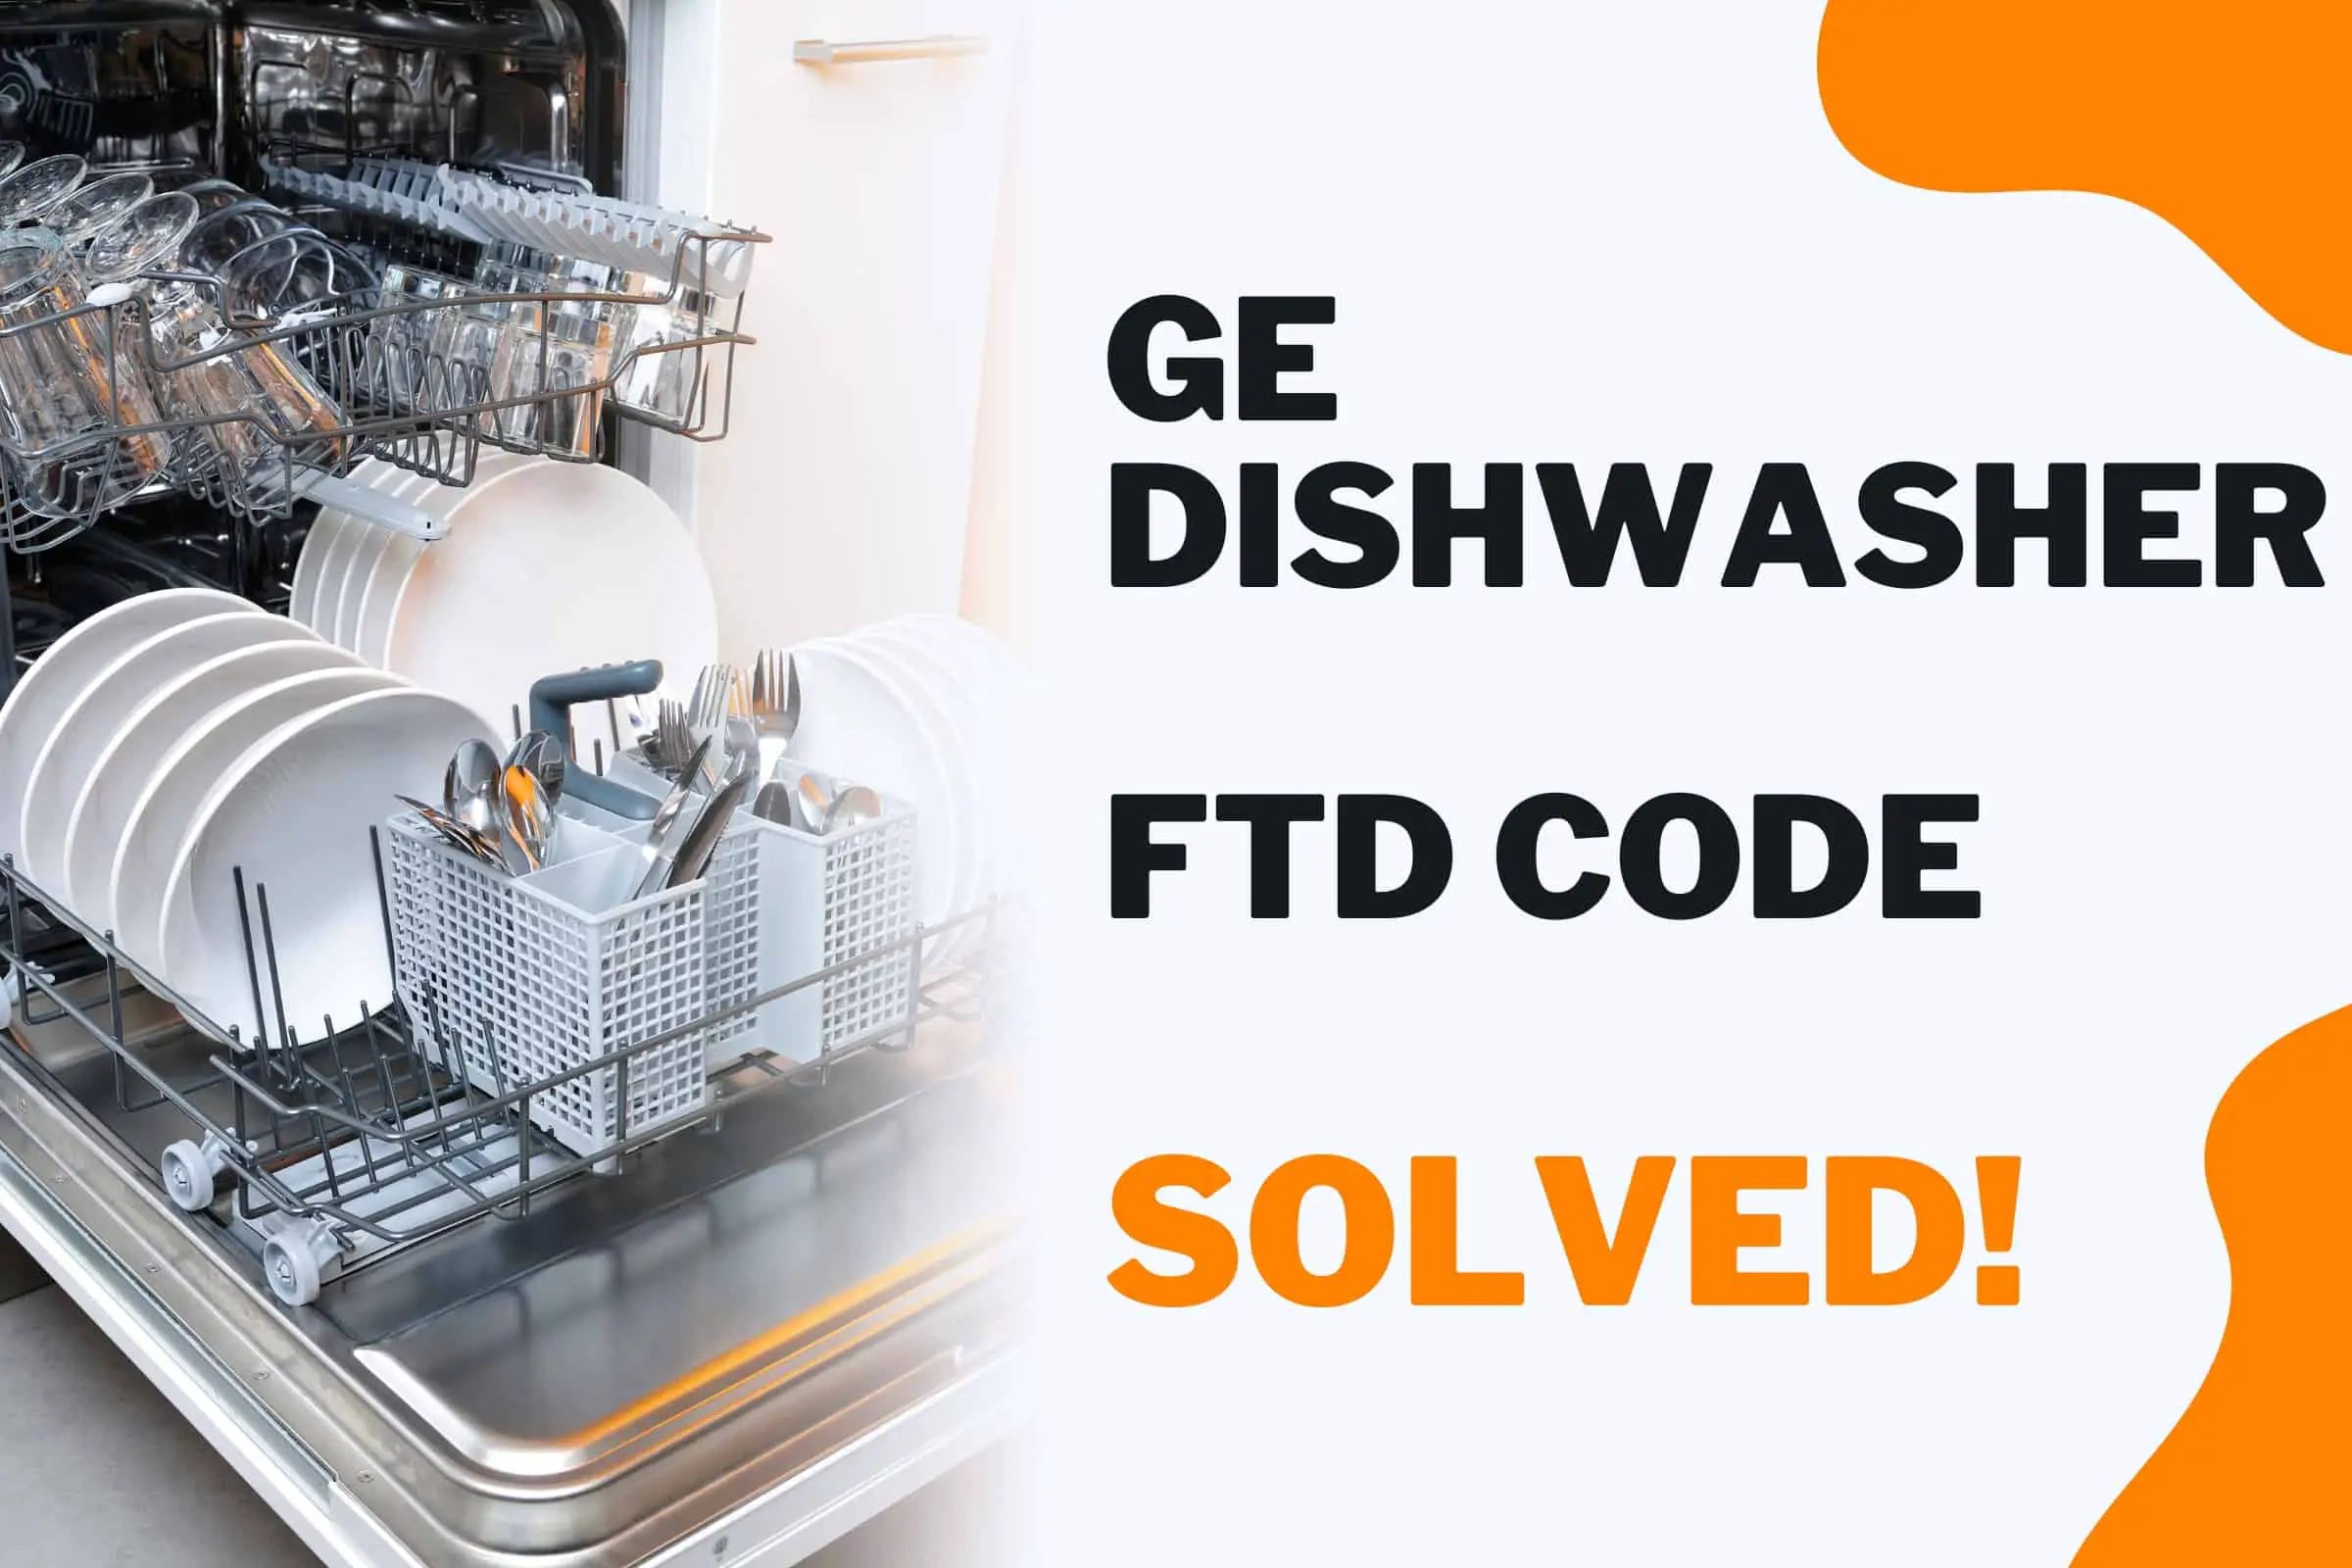 Fix Ftd Code on Ge Dishwasher: Ultimate Troubleshooting Guide